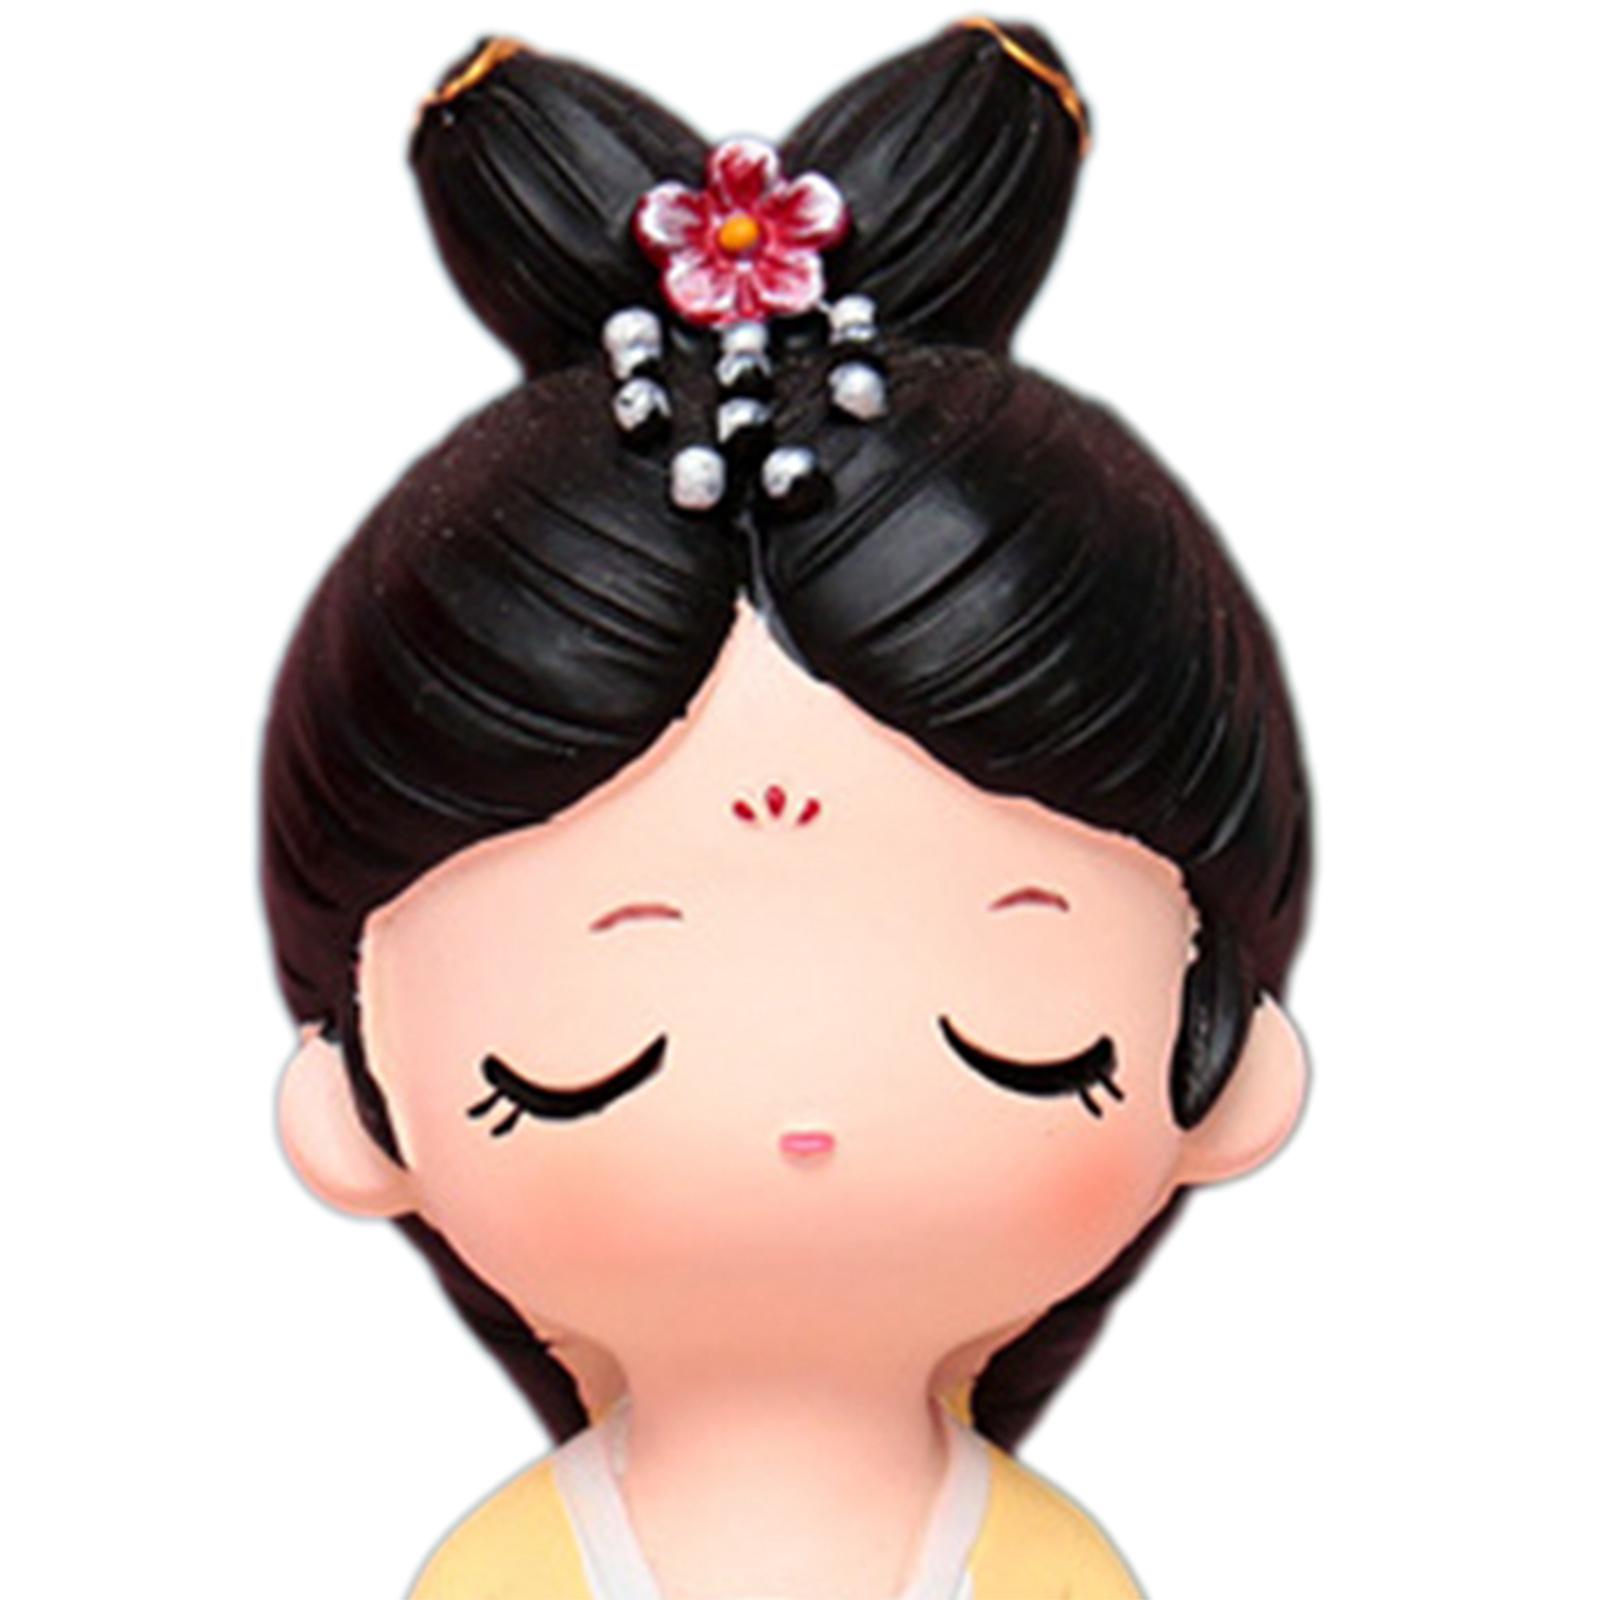 Ancient Chinese Girl Dolls Collectible Figurines Handicraft Girls Gift With Fan